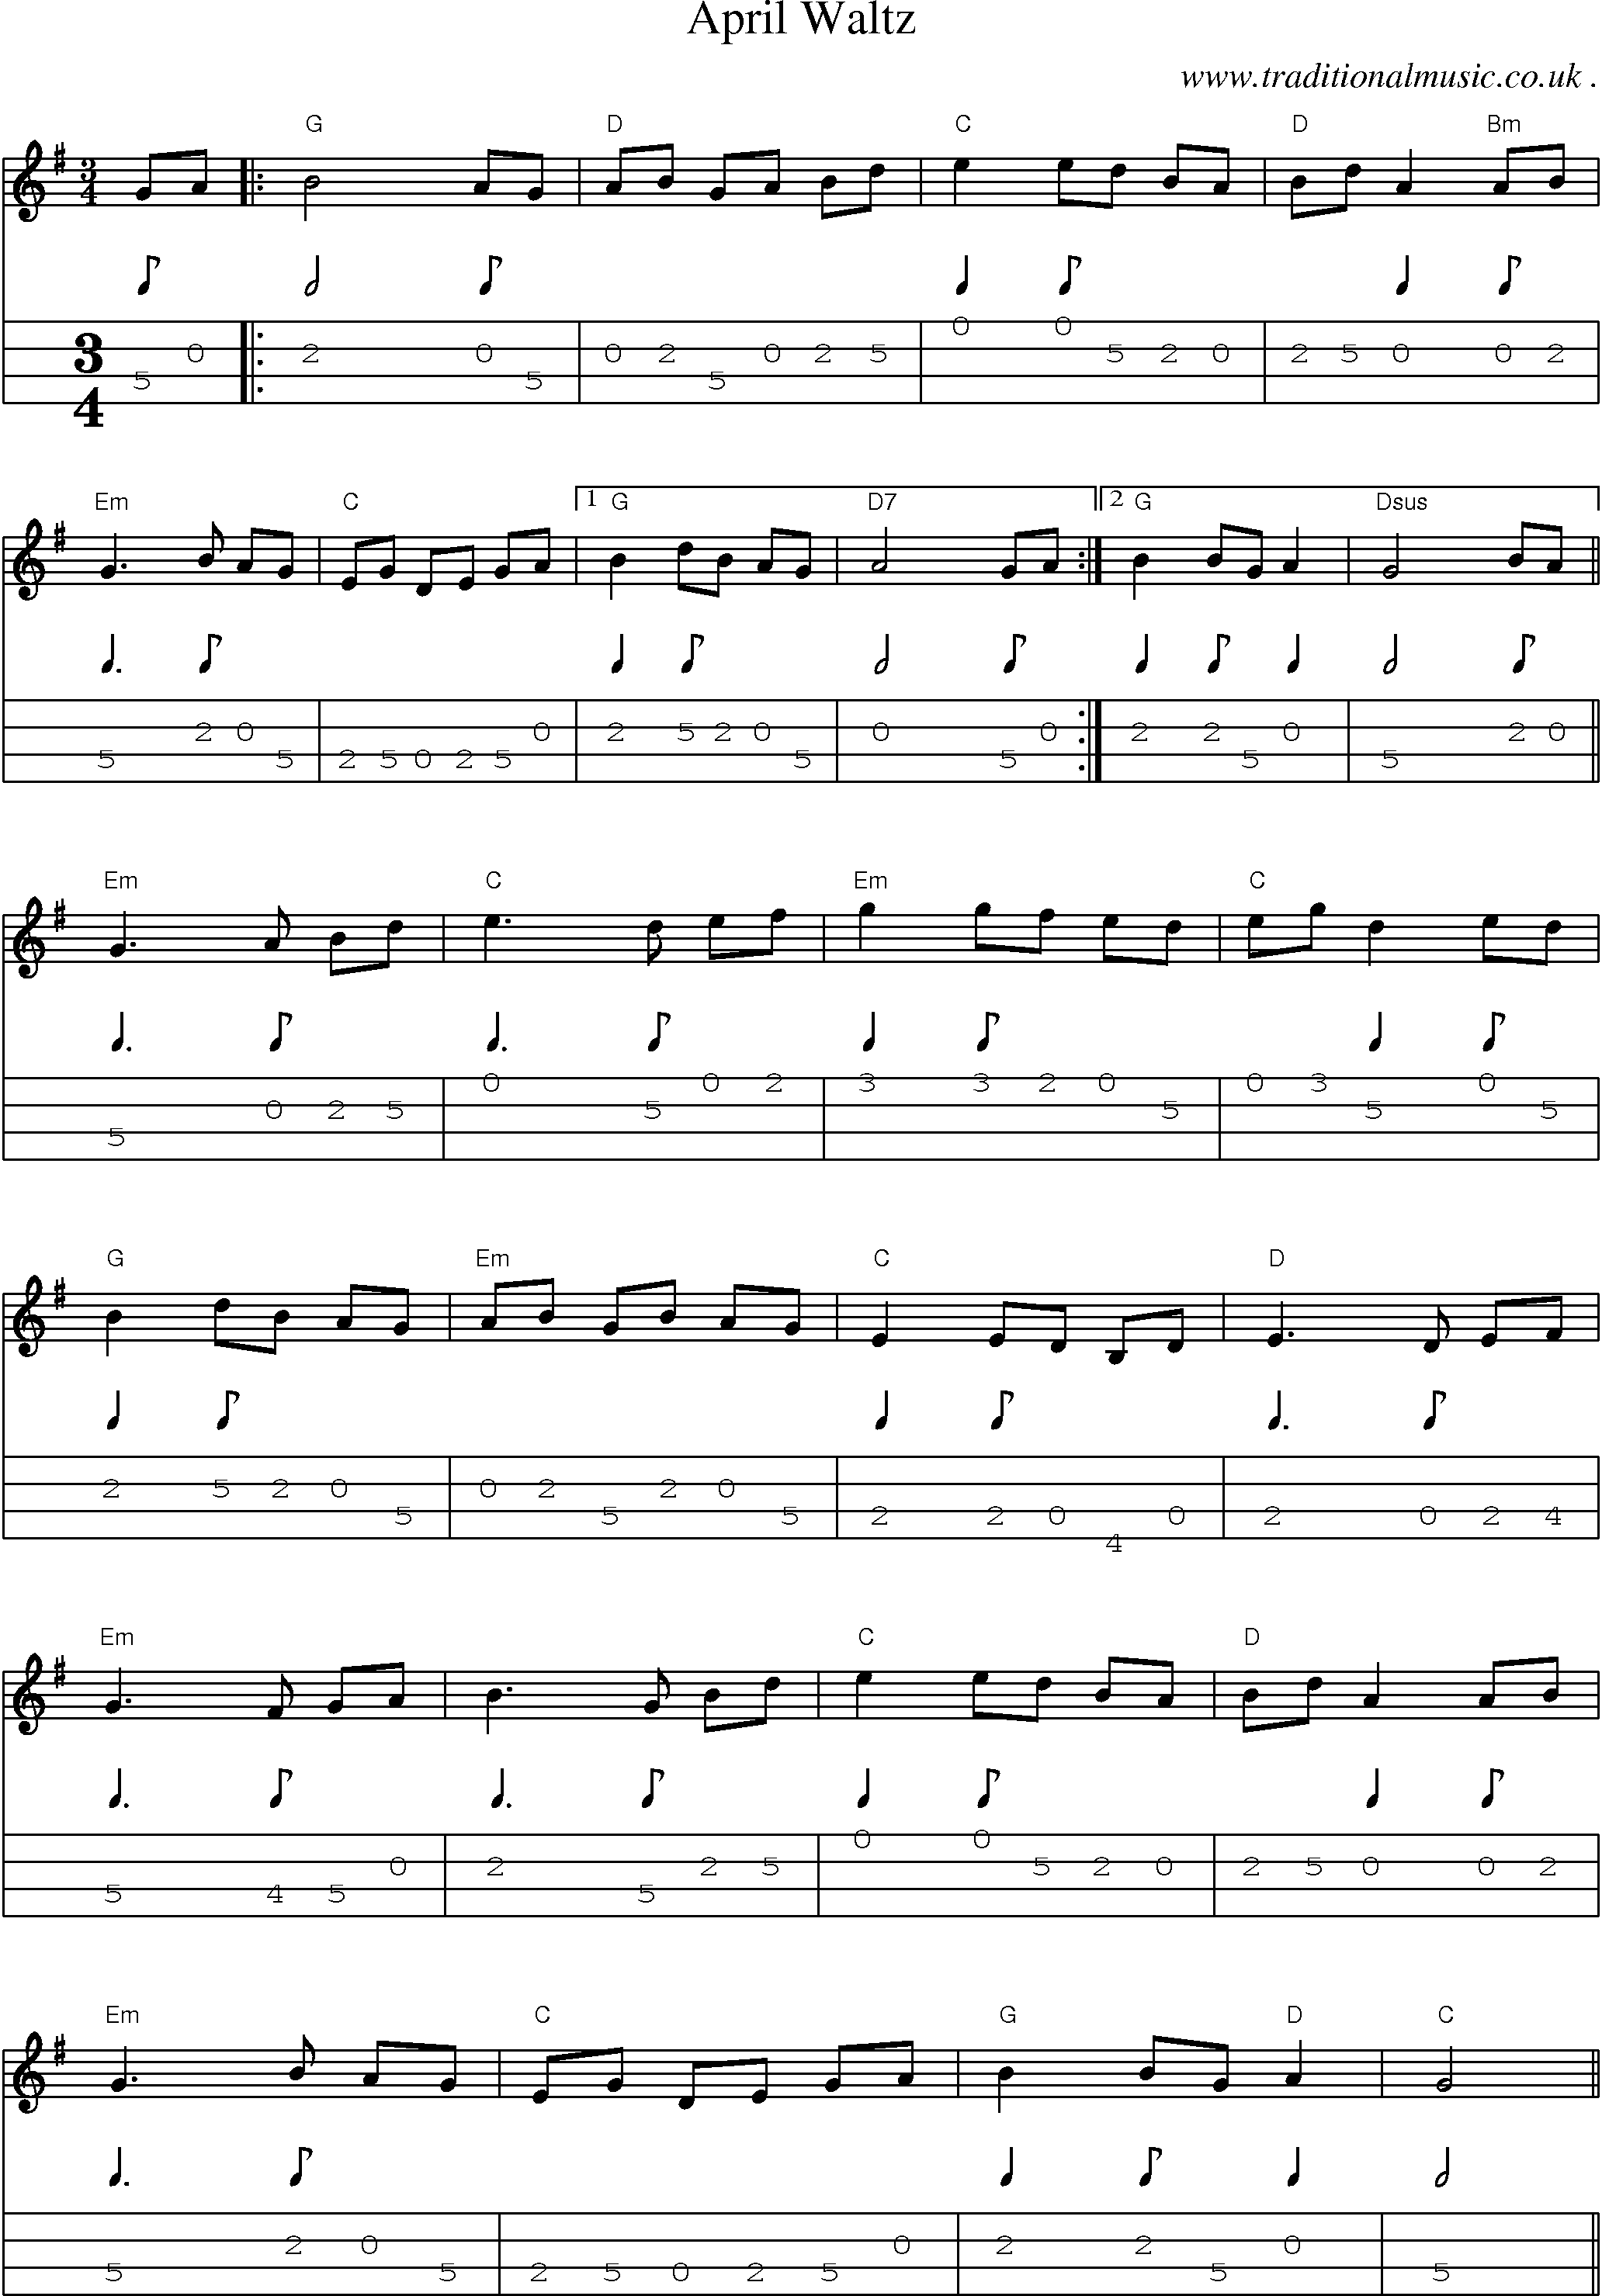 Music Score and Guitar Tabs for April Waltz